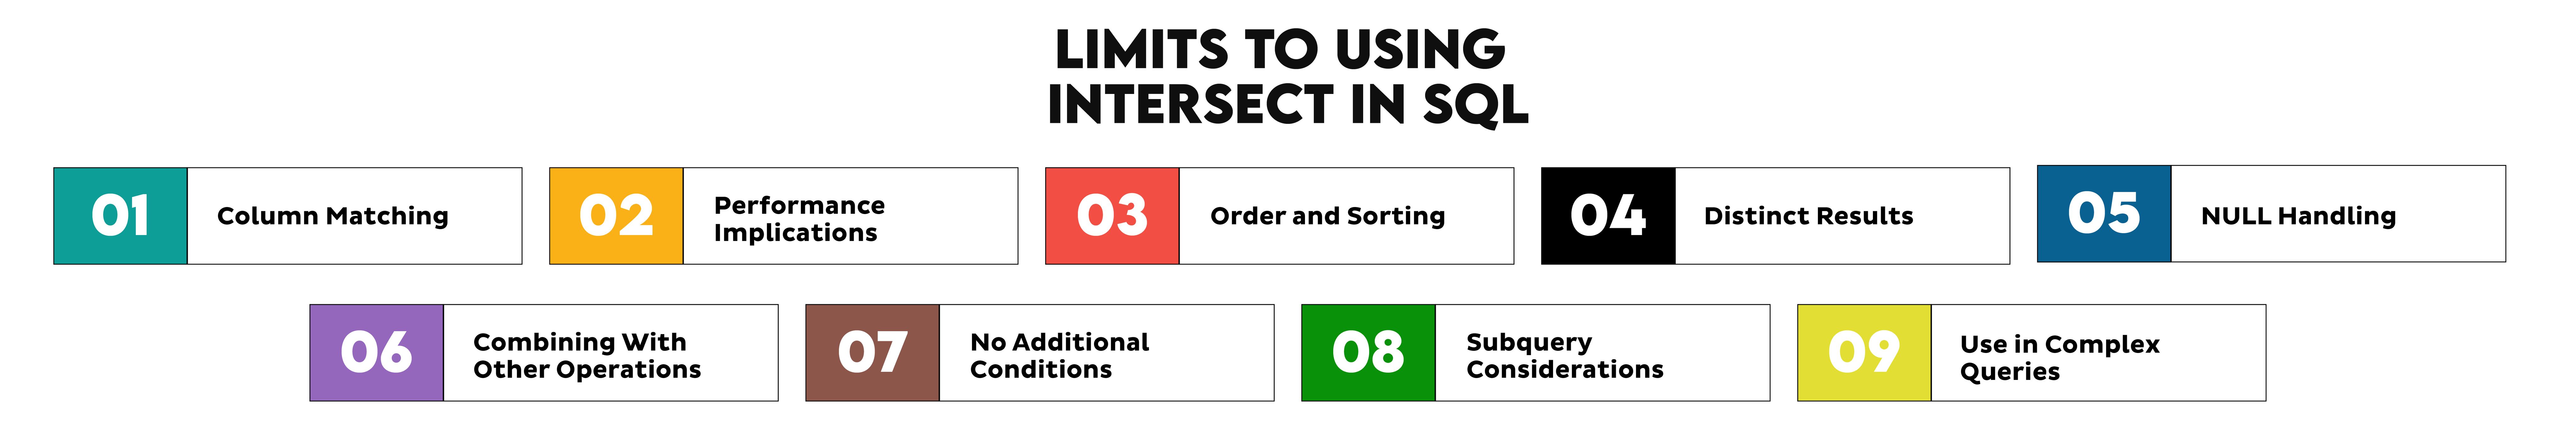 Limits to using intersect in SQL